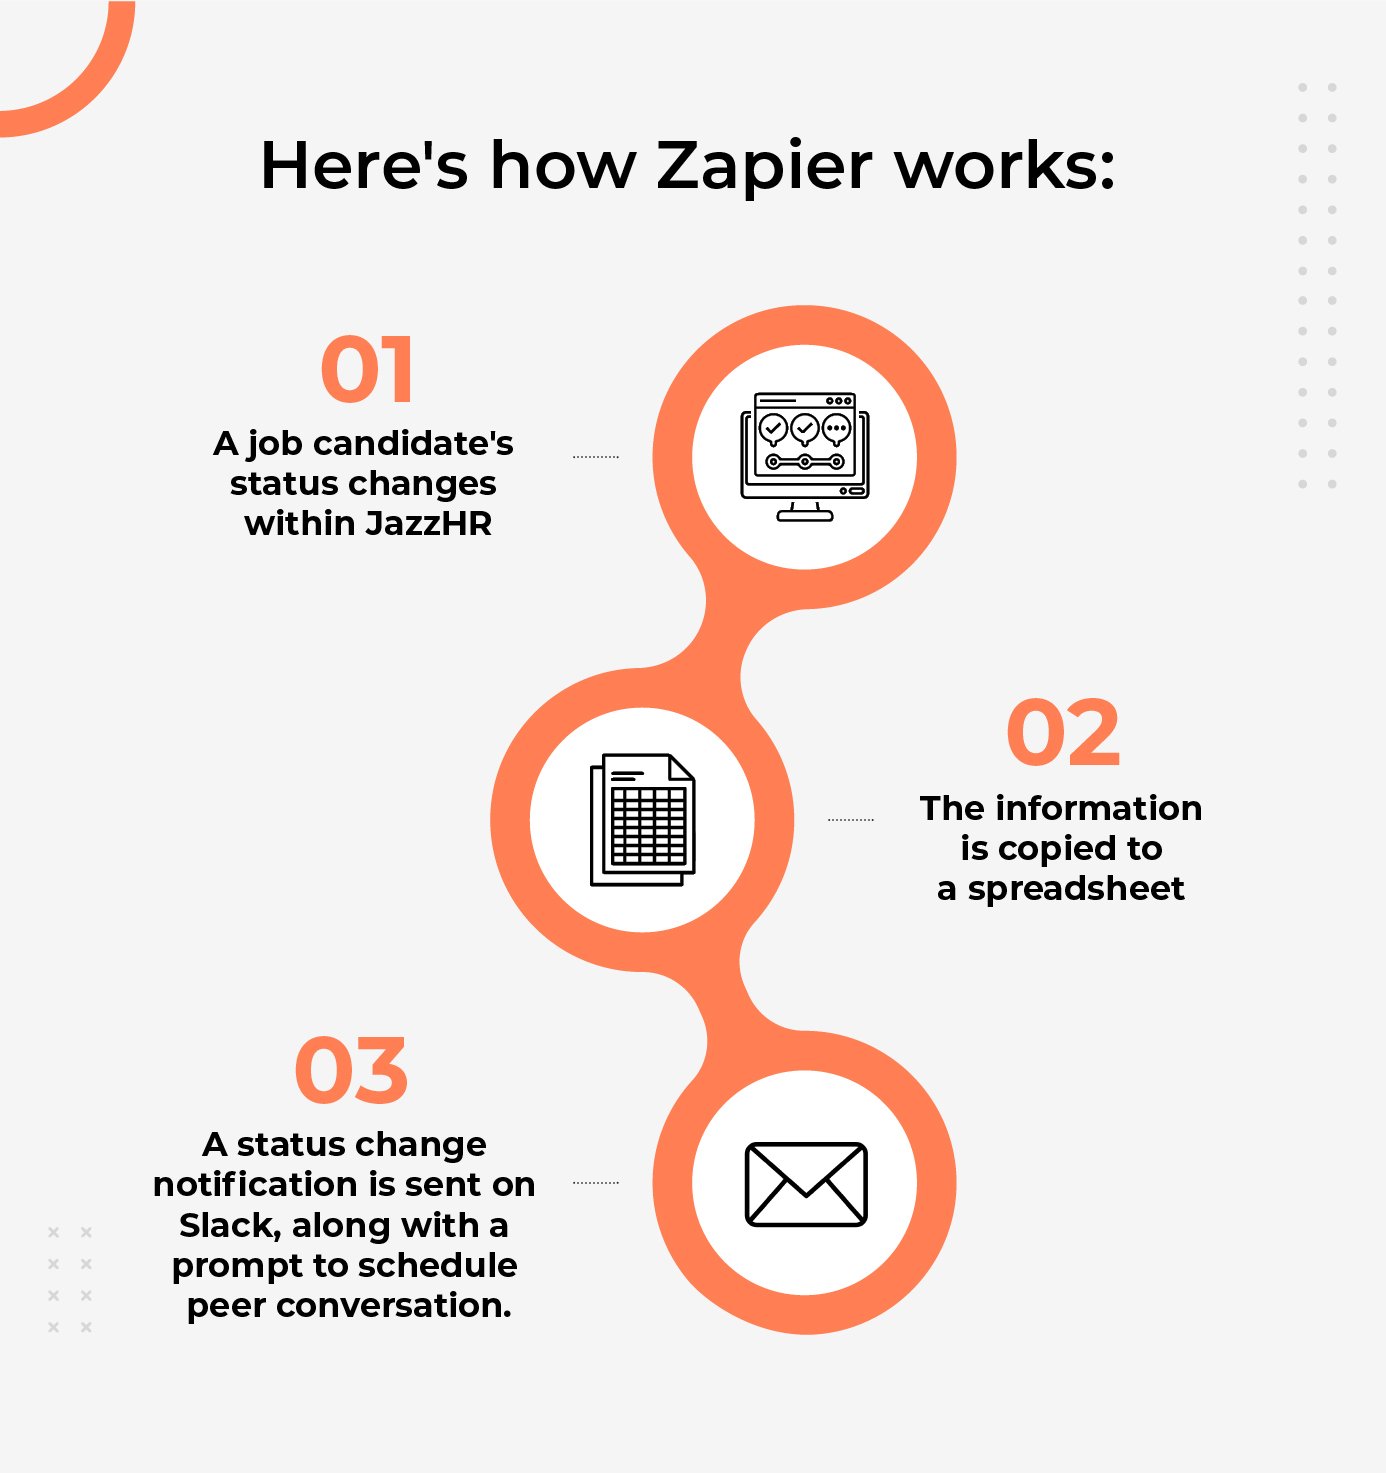 Axelerant uses Zapier to automate candidate journey